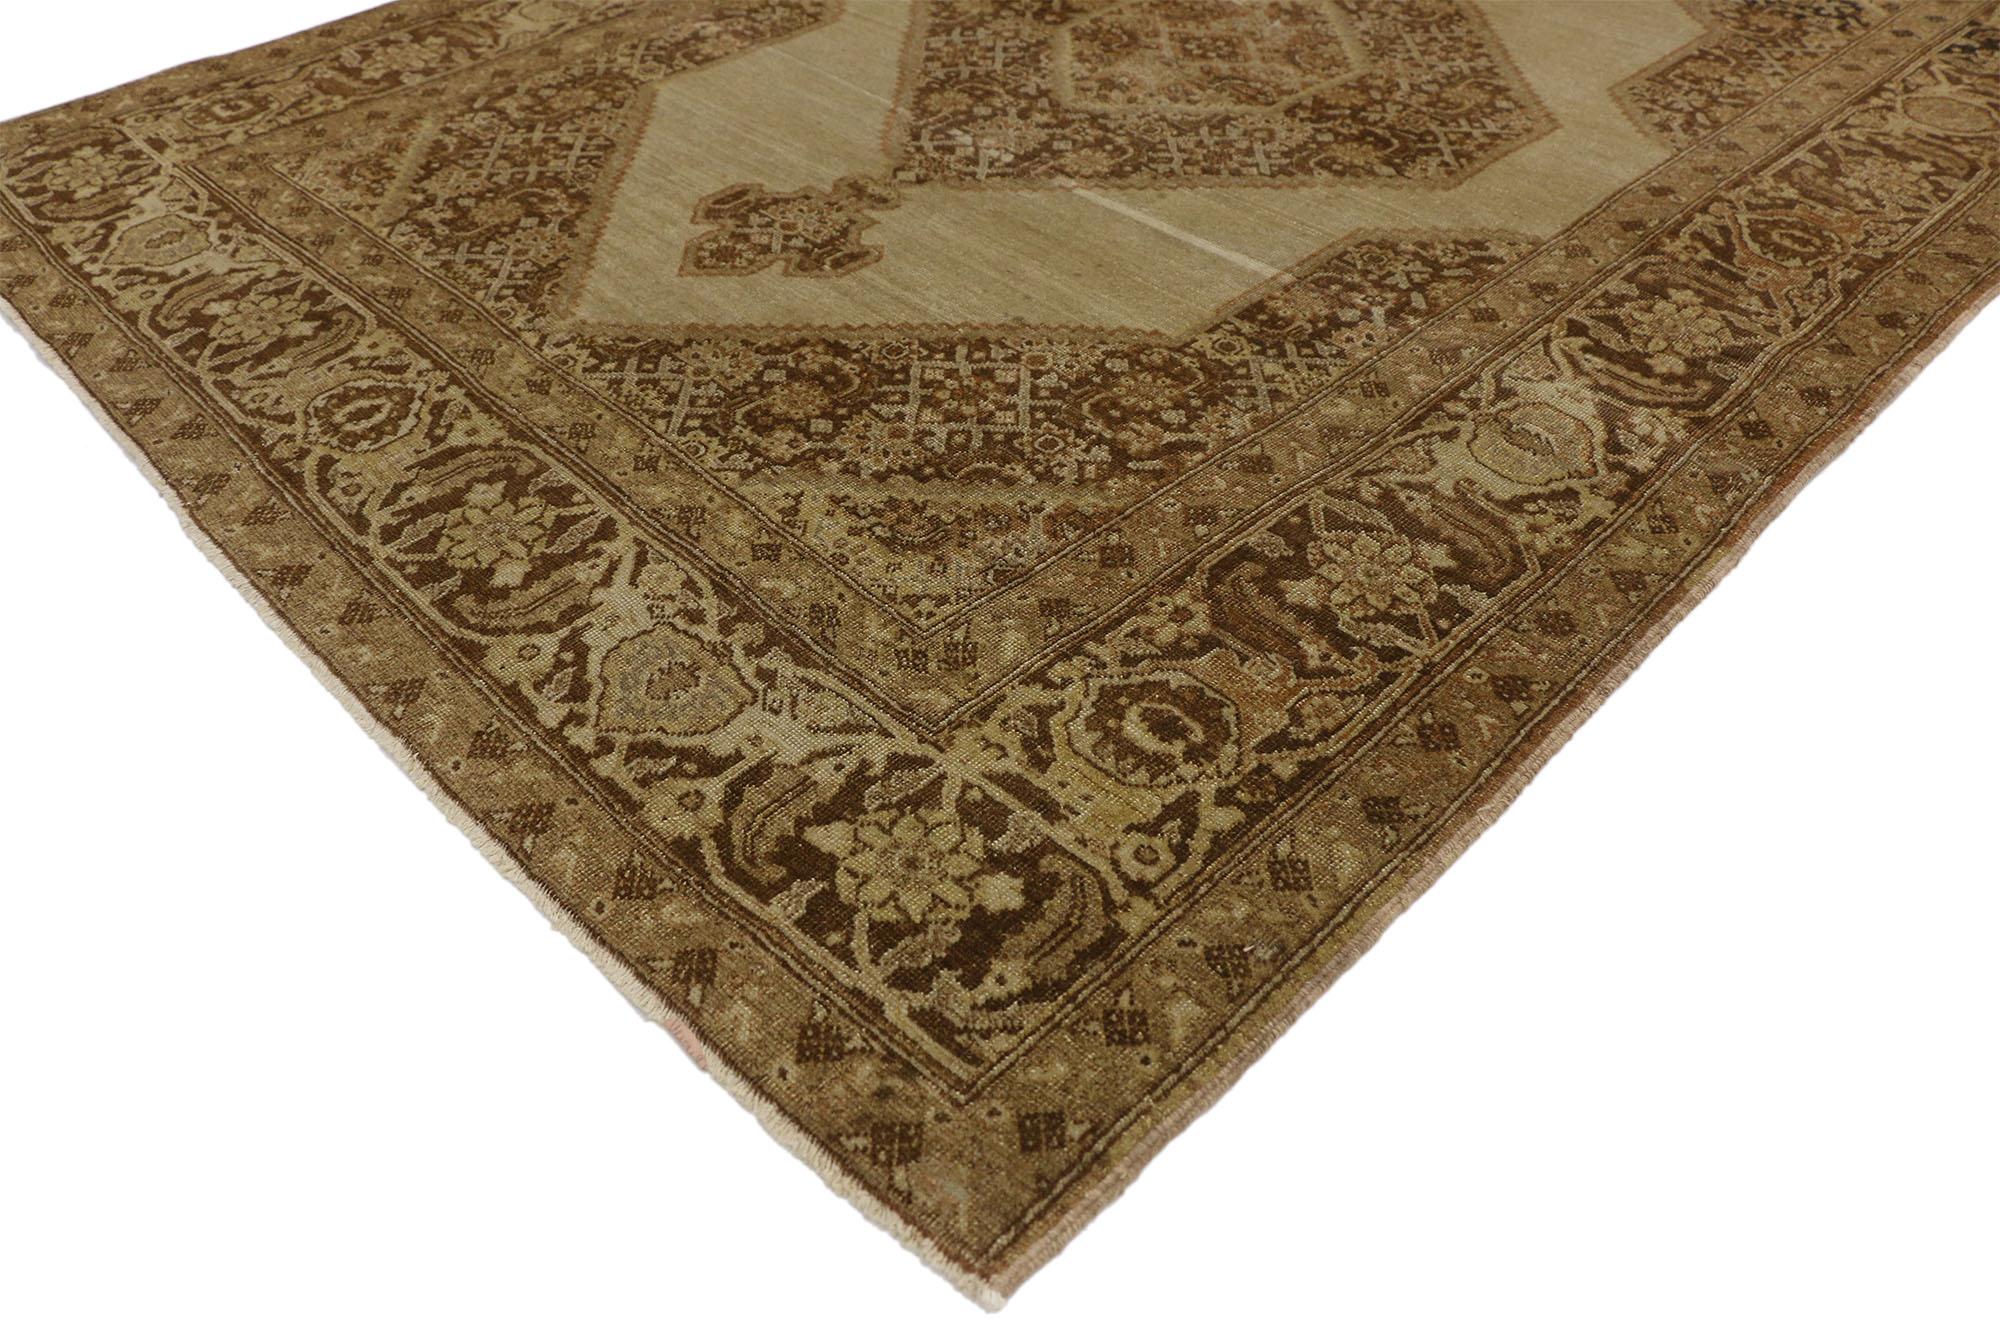 50531 Haji Khalili Antique Persian Tabriz rug with Warm, Industrial style. This hand-knotted wool Haji Khalili antique Persian Tabriz rug features a large serrated hexagonal medallion anchored with pendants centered on an abrashed beige field. The